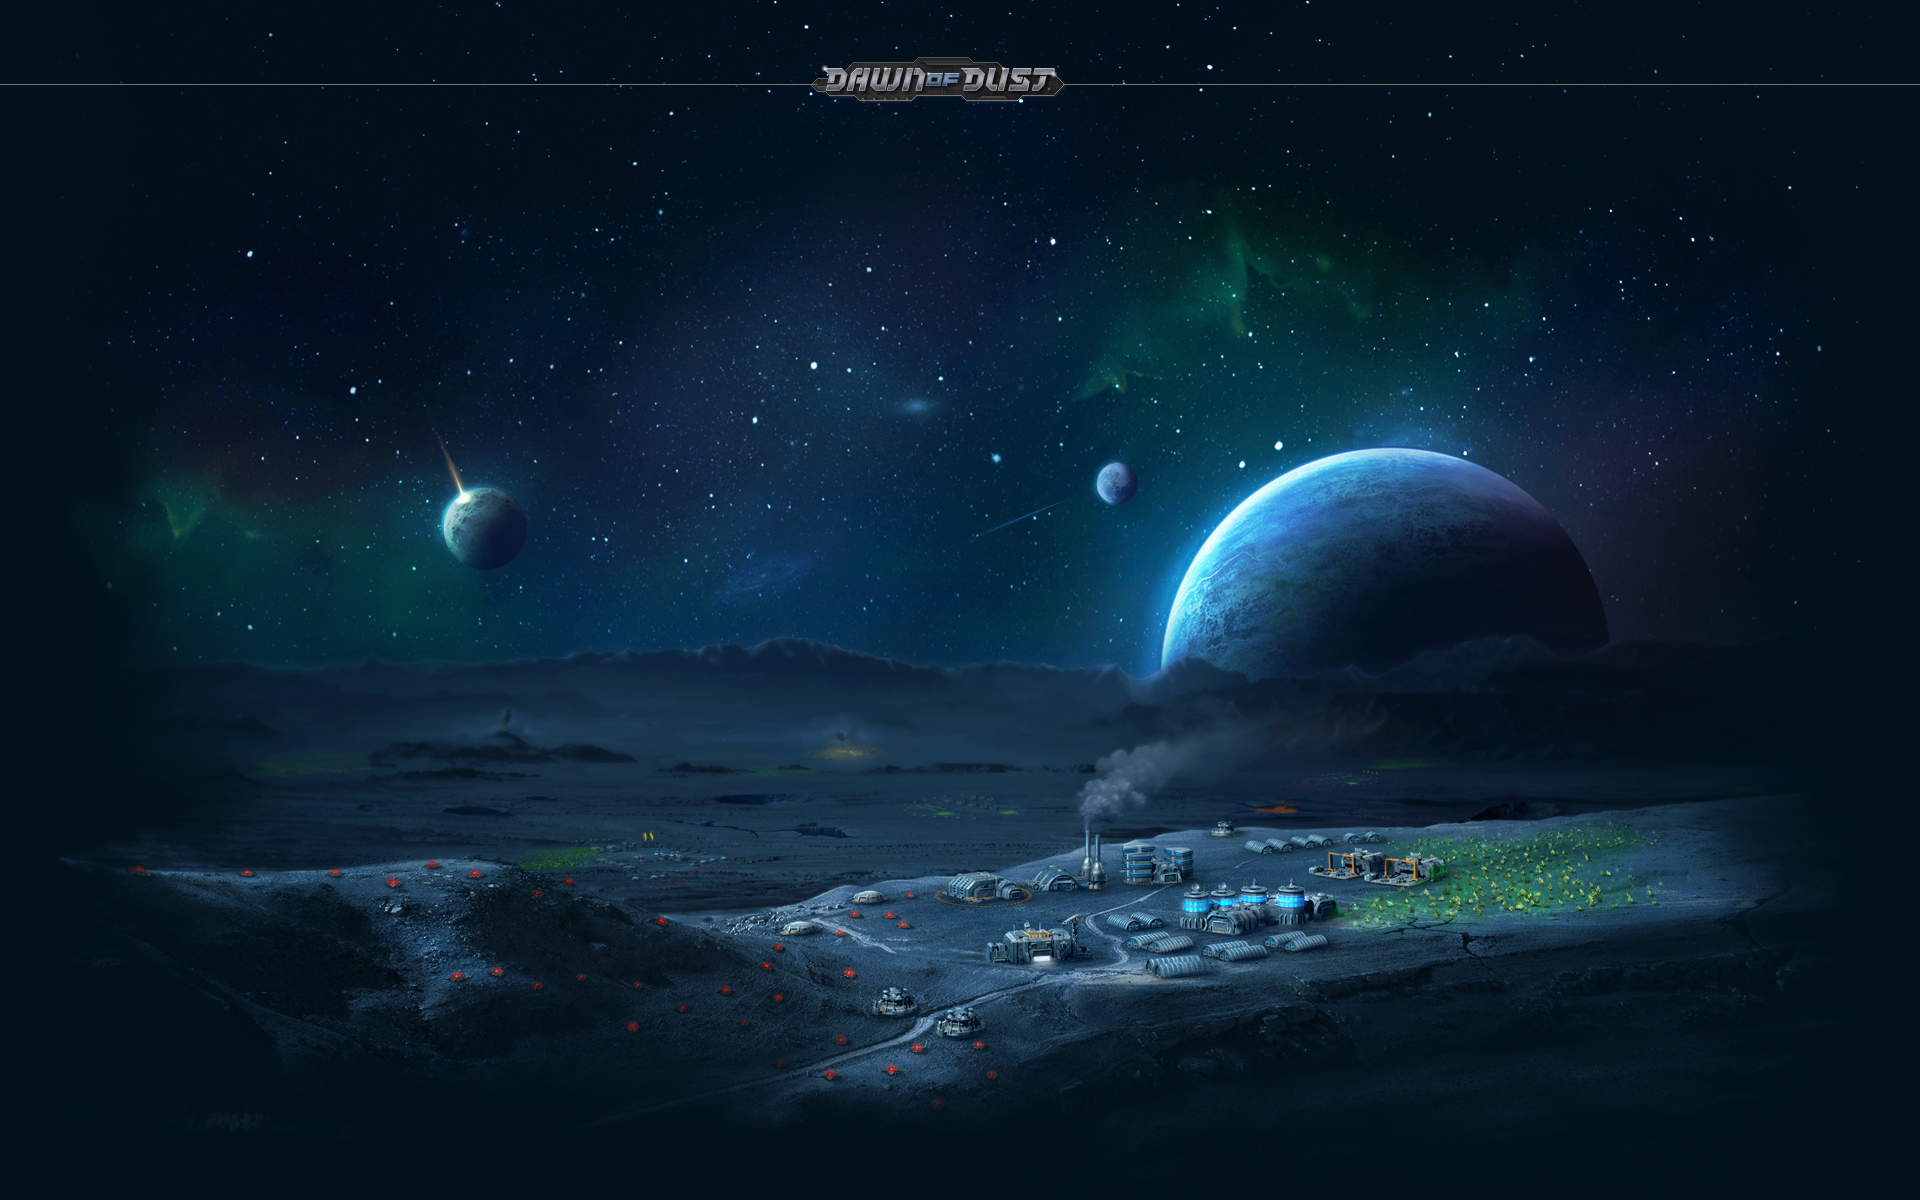 Dawn Of Dust Online Game Mmo Via HD Wallpaper Background